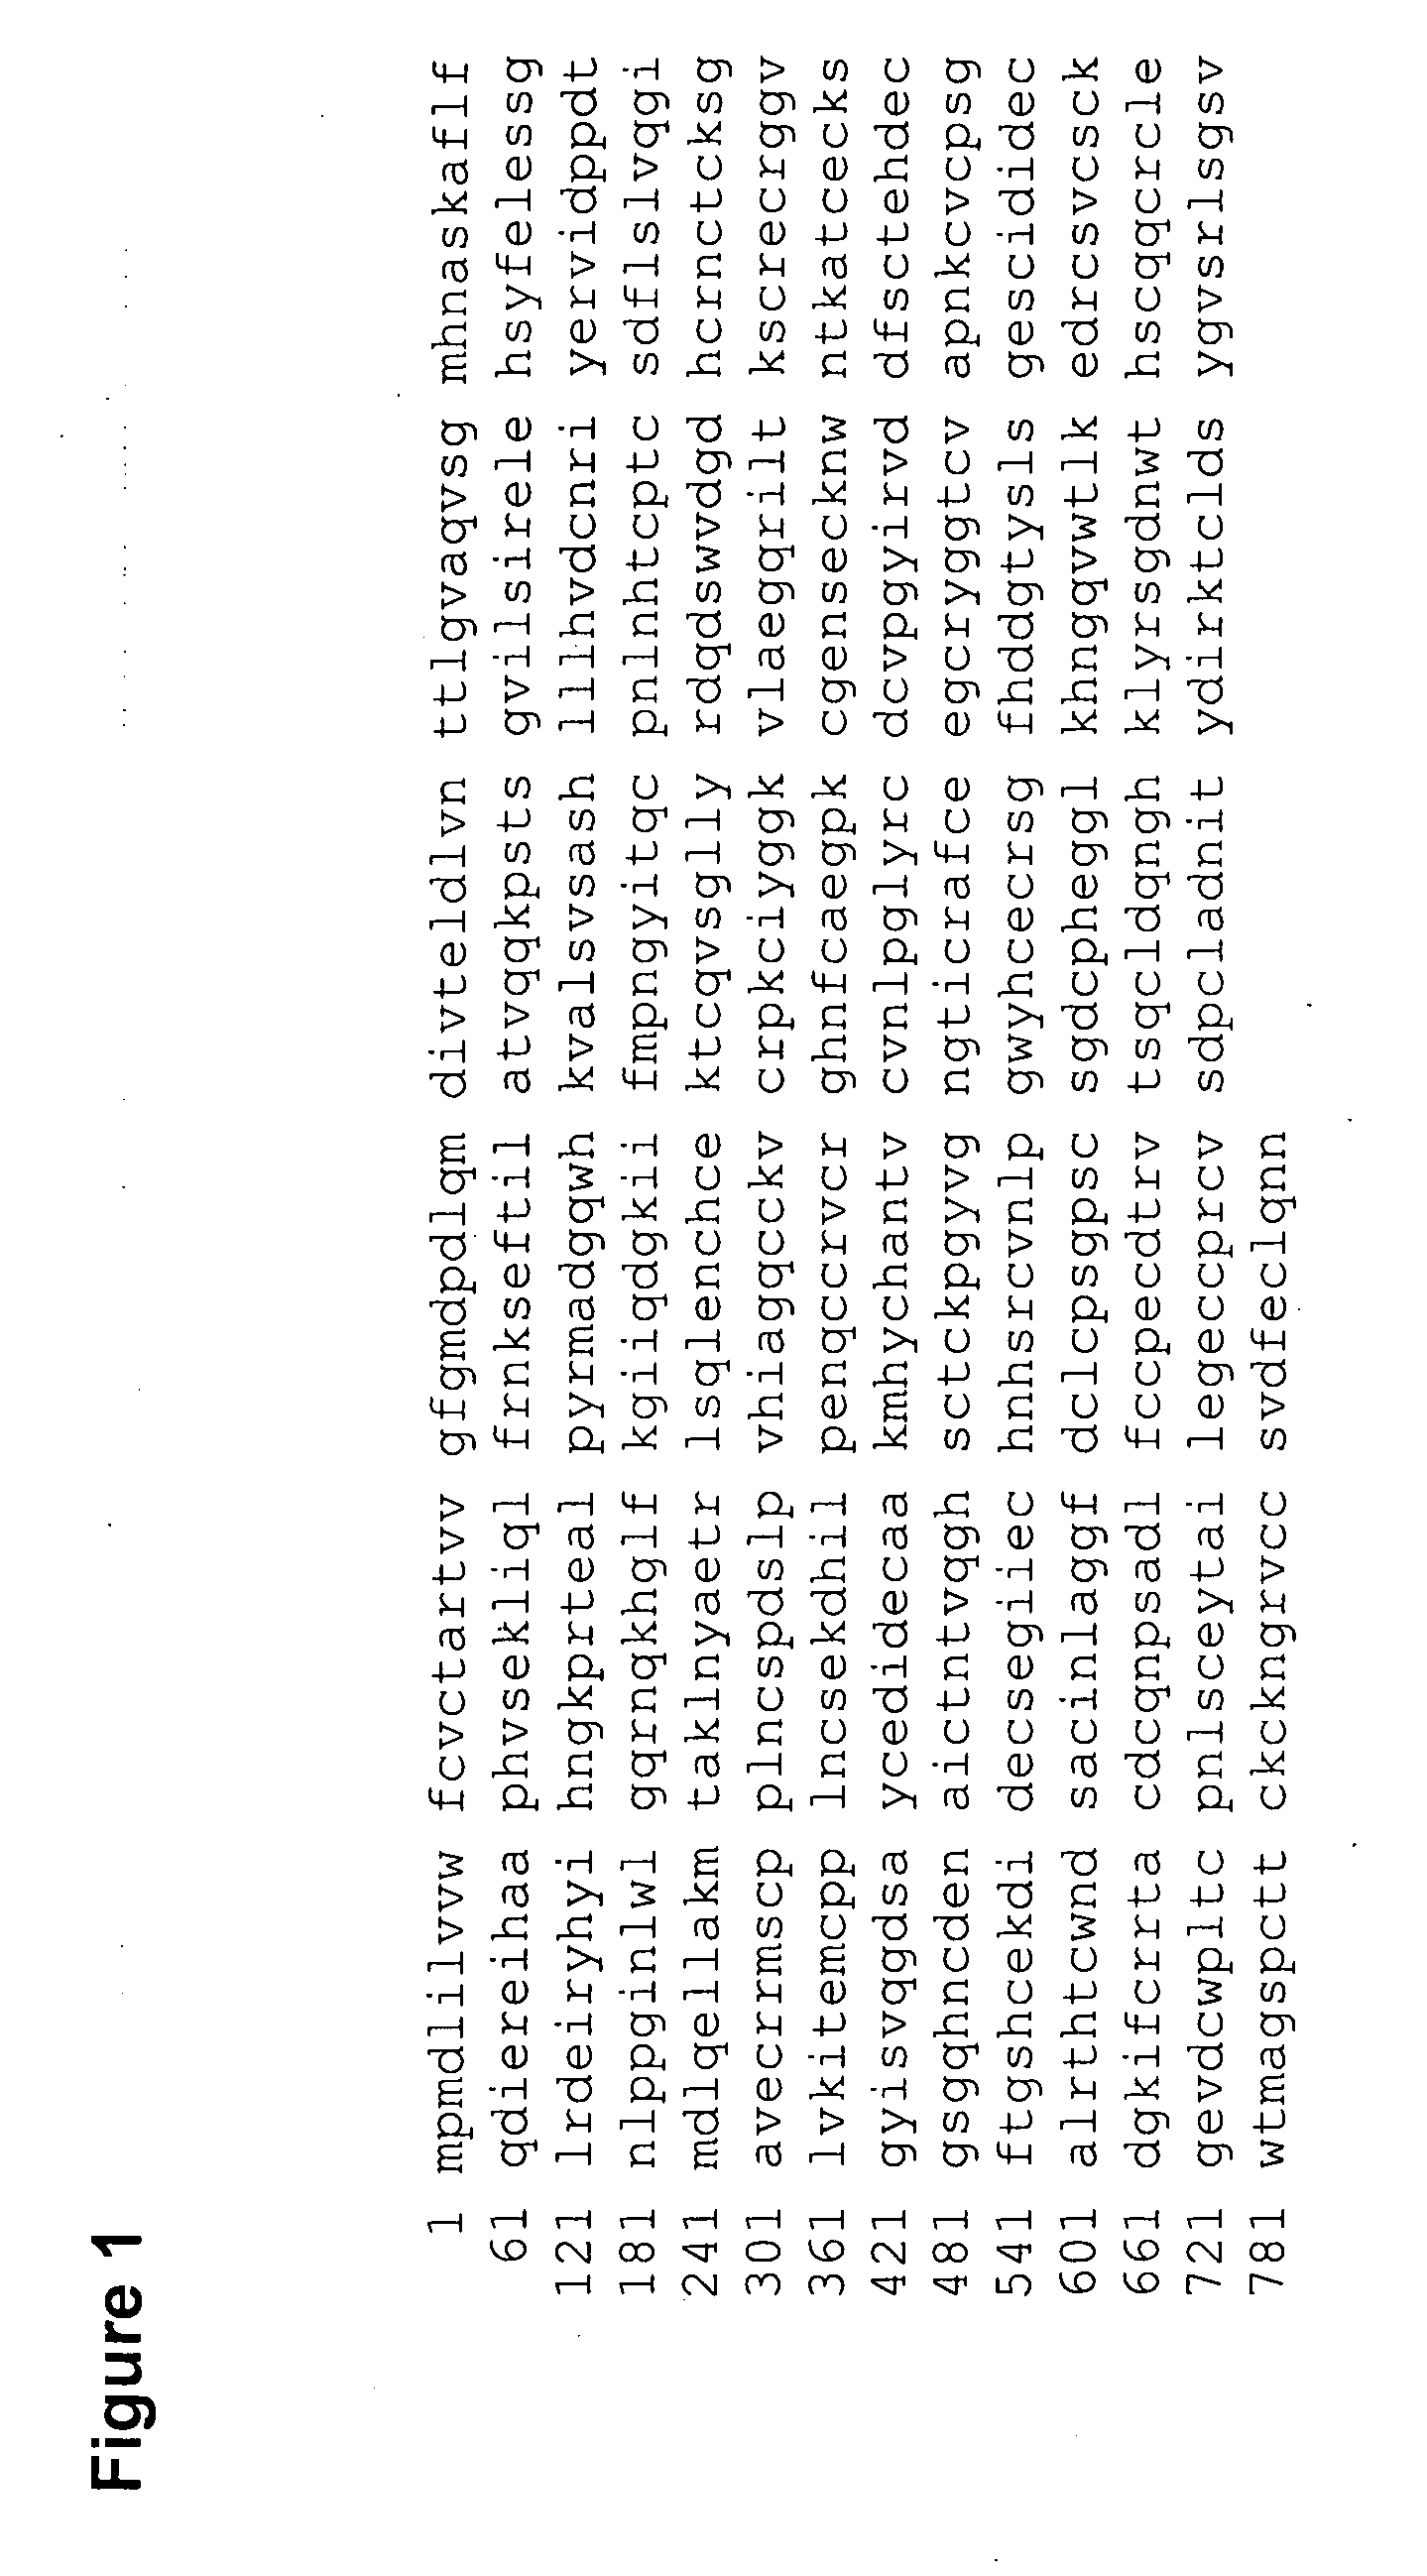 Methods for Promoting Wound Healing and Muscle Regeneration with the Cell Signaling Protein Nell1